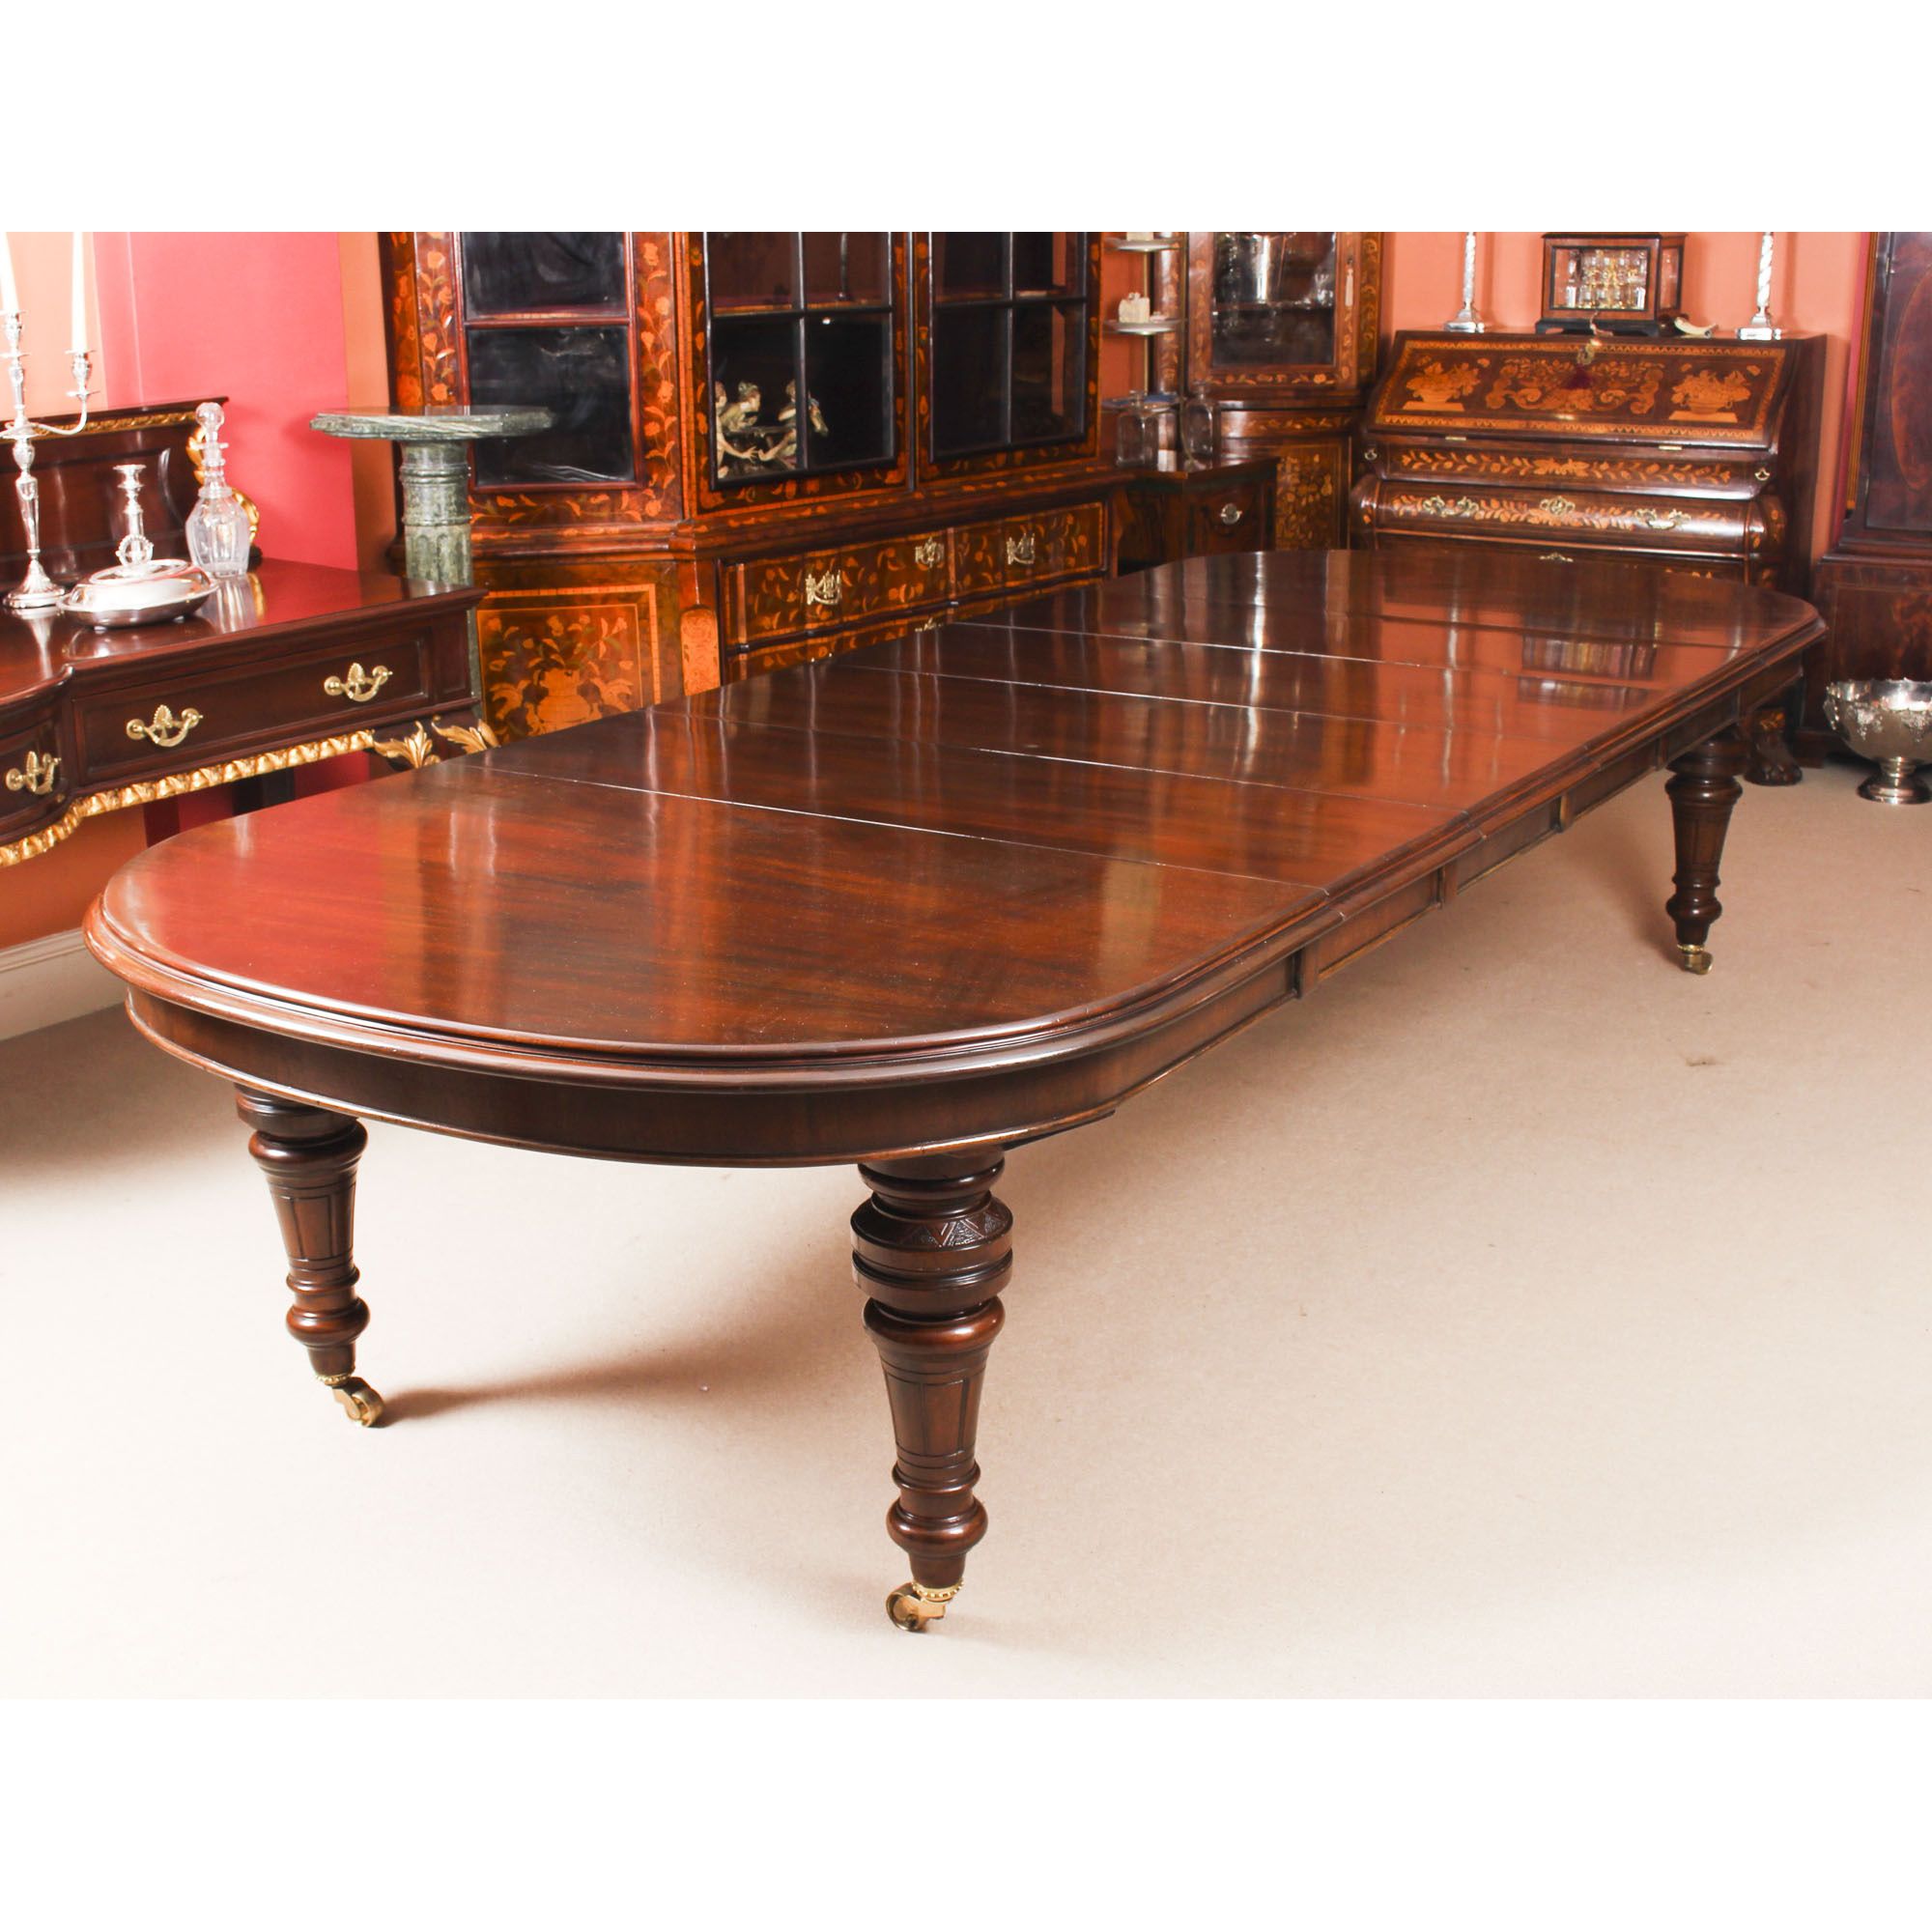 Antique Victorian Mahogany Extending Dining Table 19Th C Within Widely Used Tuscan Chestnut Toscana Extending Dining Tables (View 16 of 25)